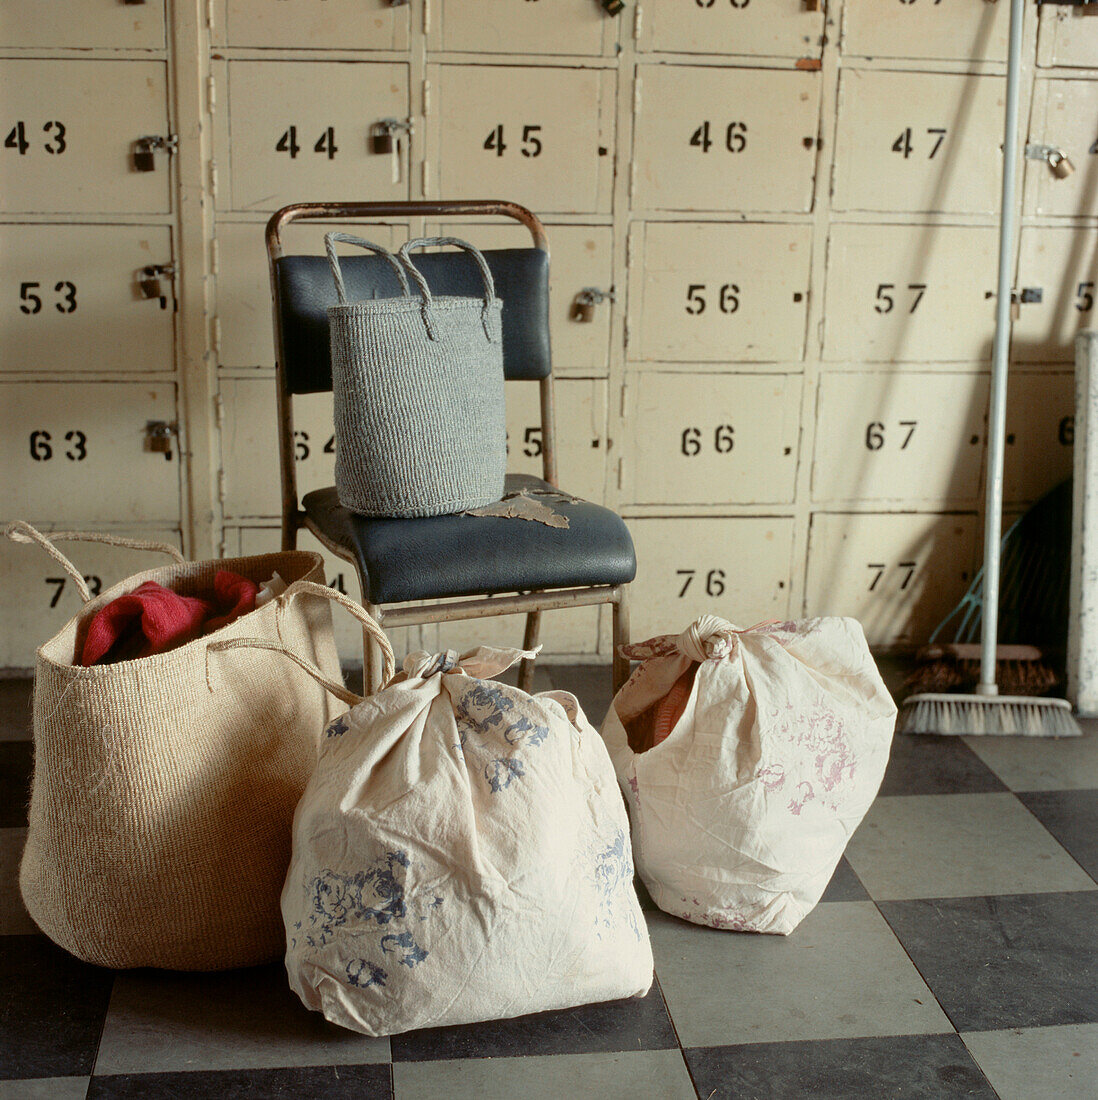 Bags of tied up laundry in a locker room